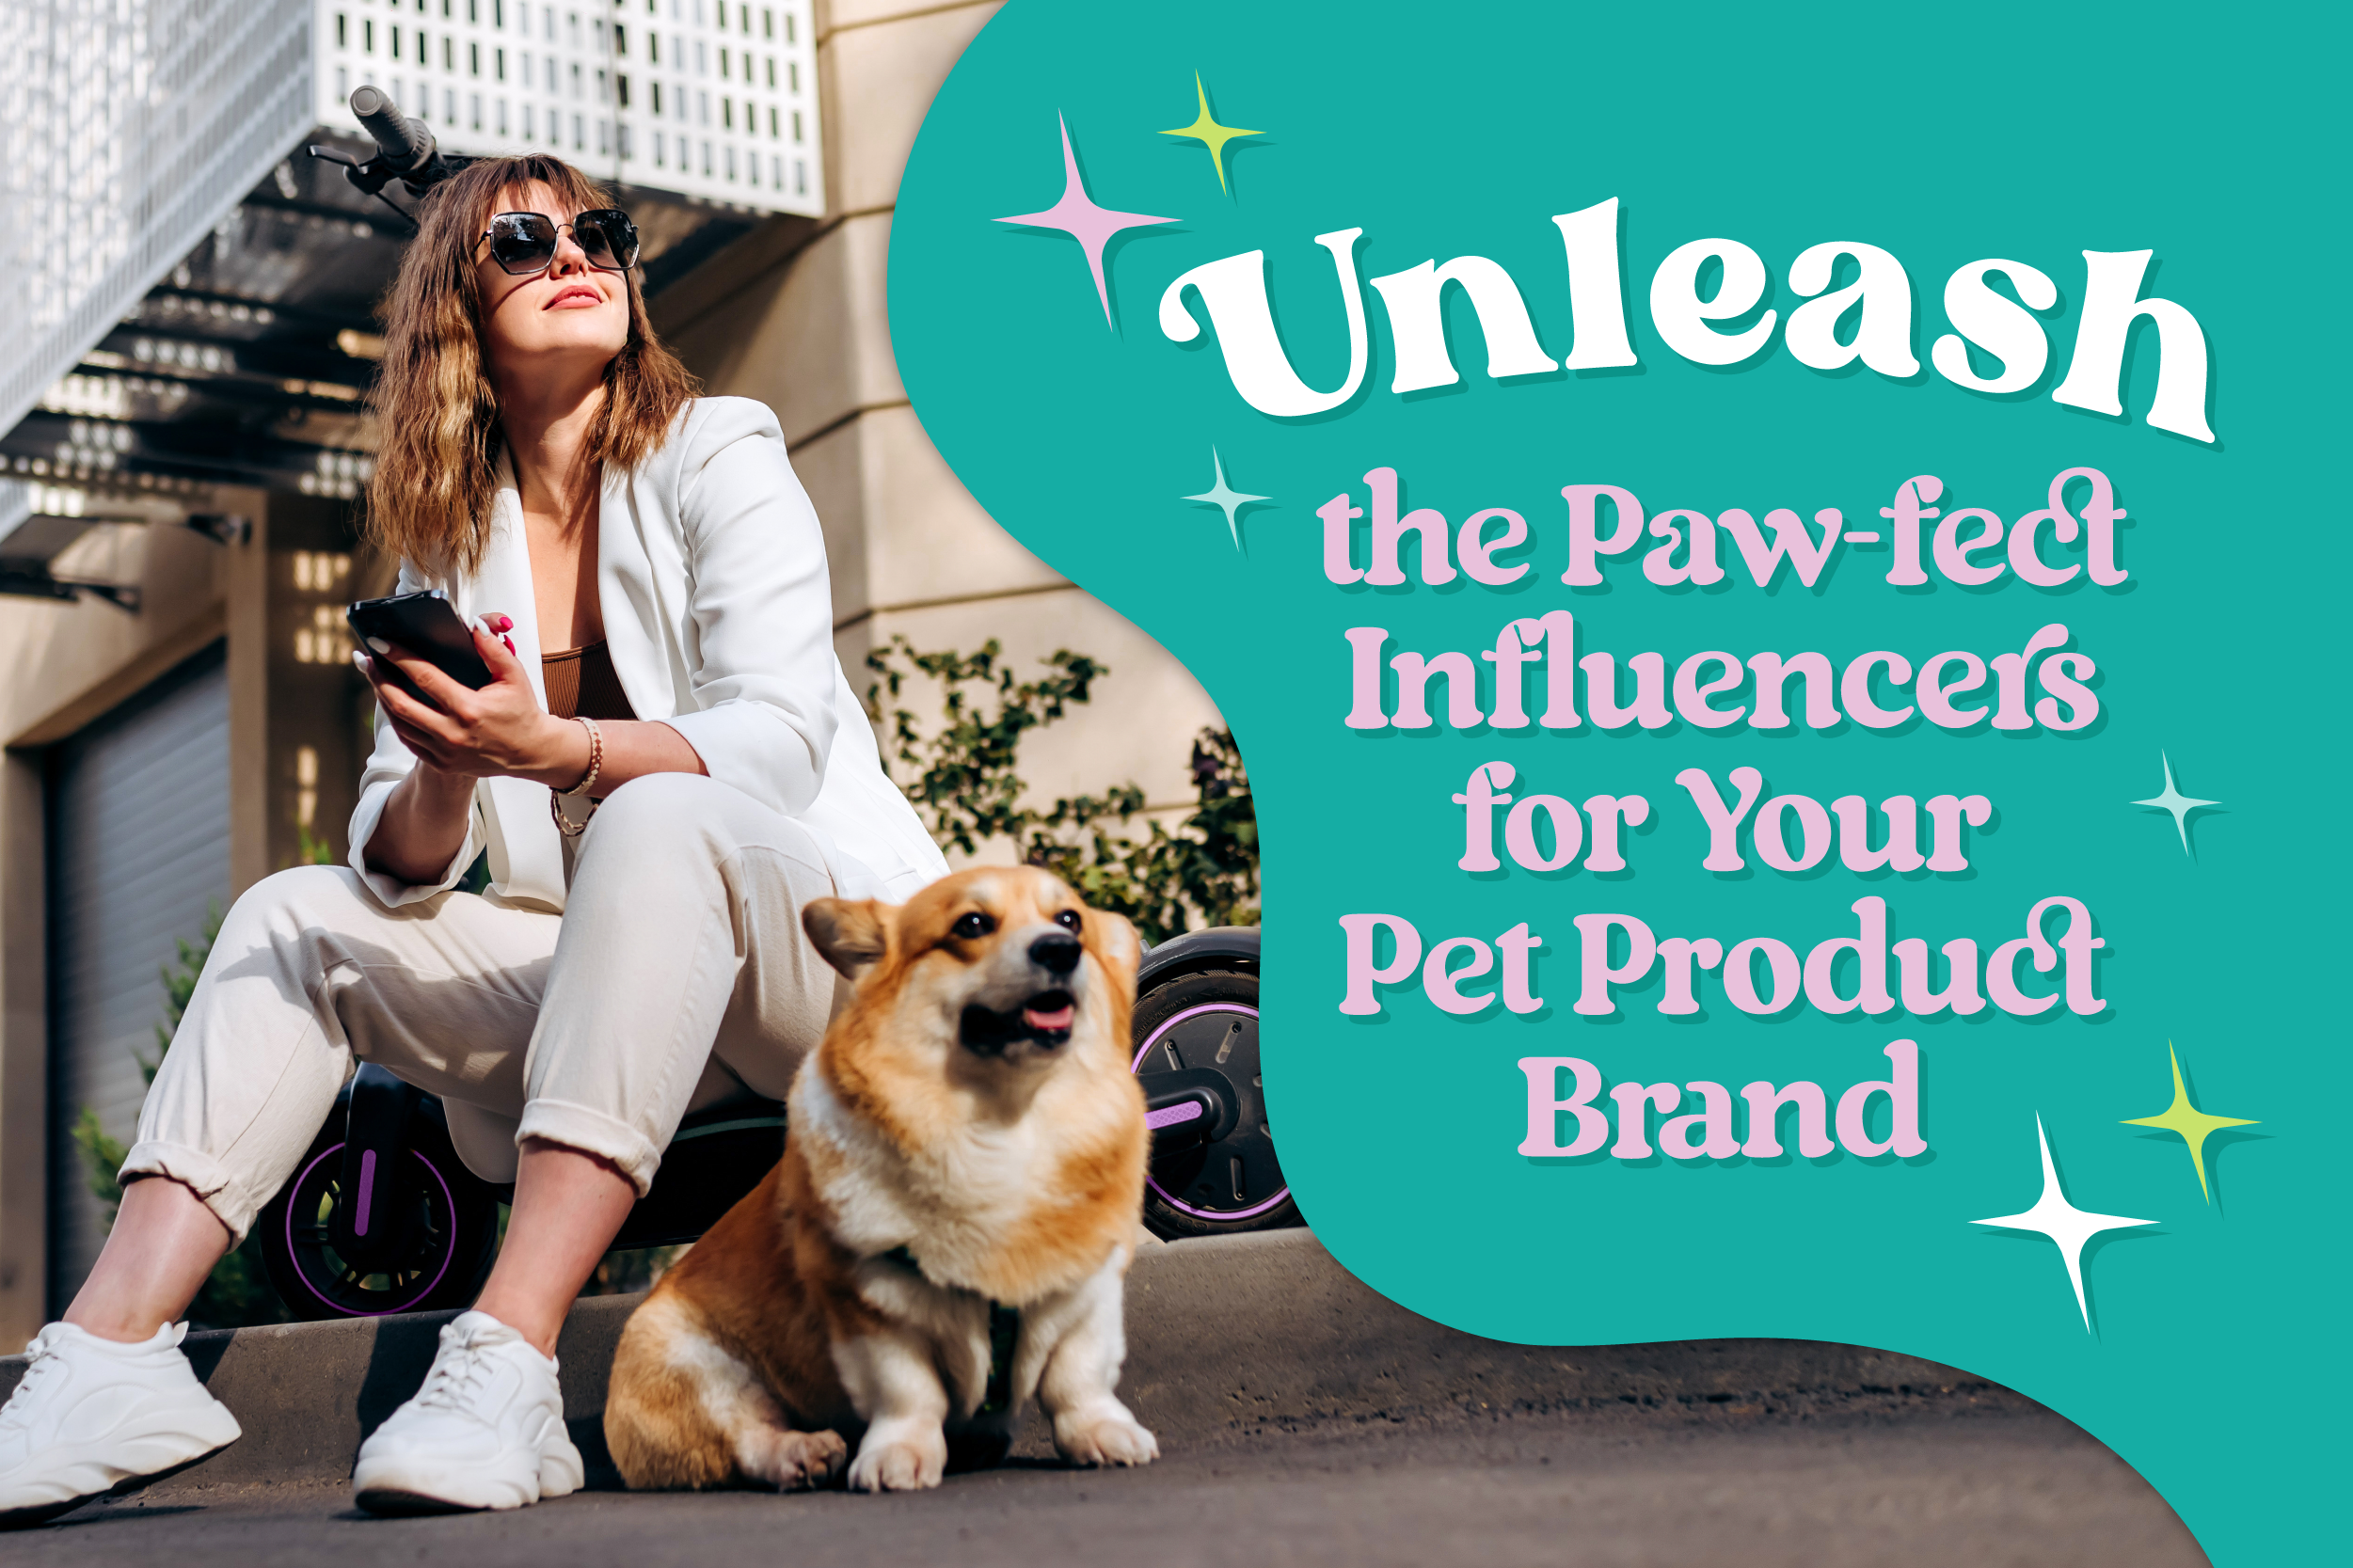 woman in white outfit next to corgi using social for influencer pet brand marketing